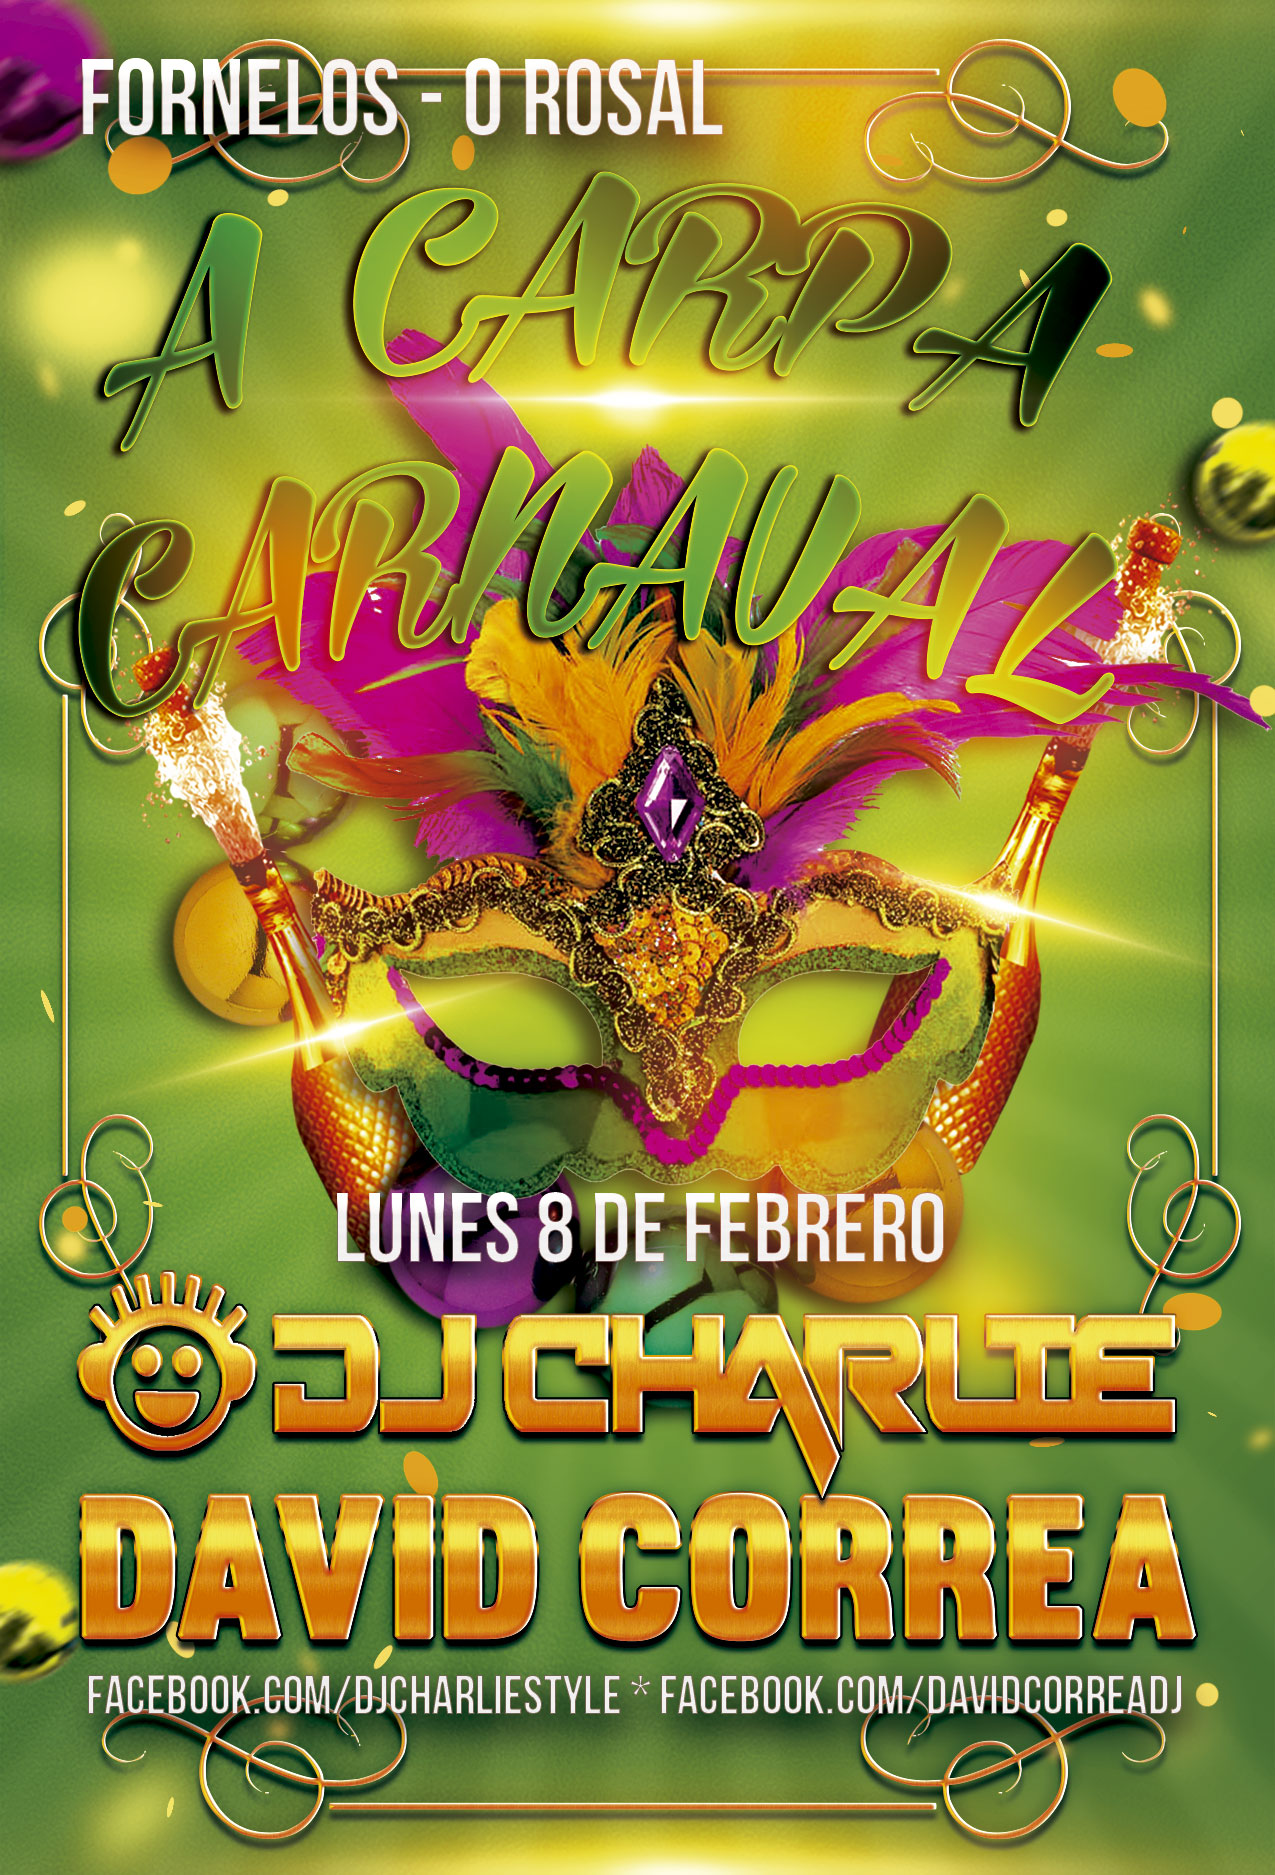 08-02-2016-Fornelos-Carnaval-PERSO